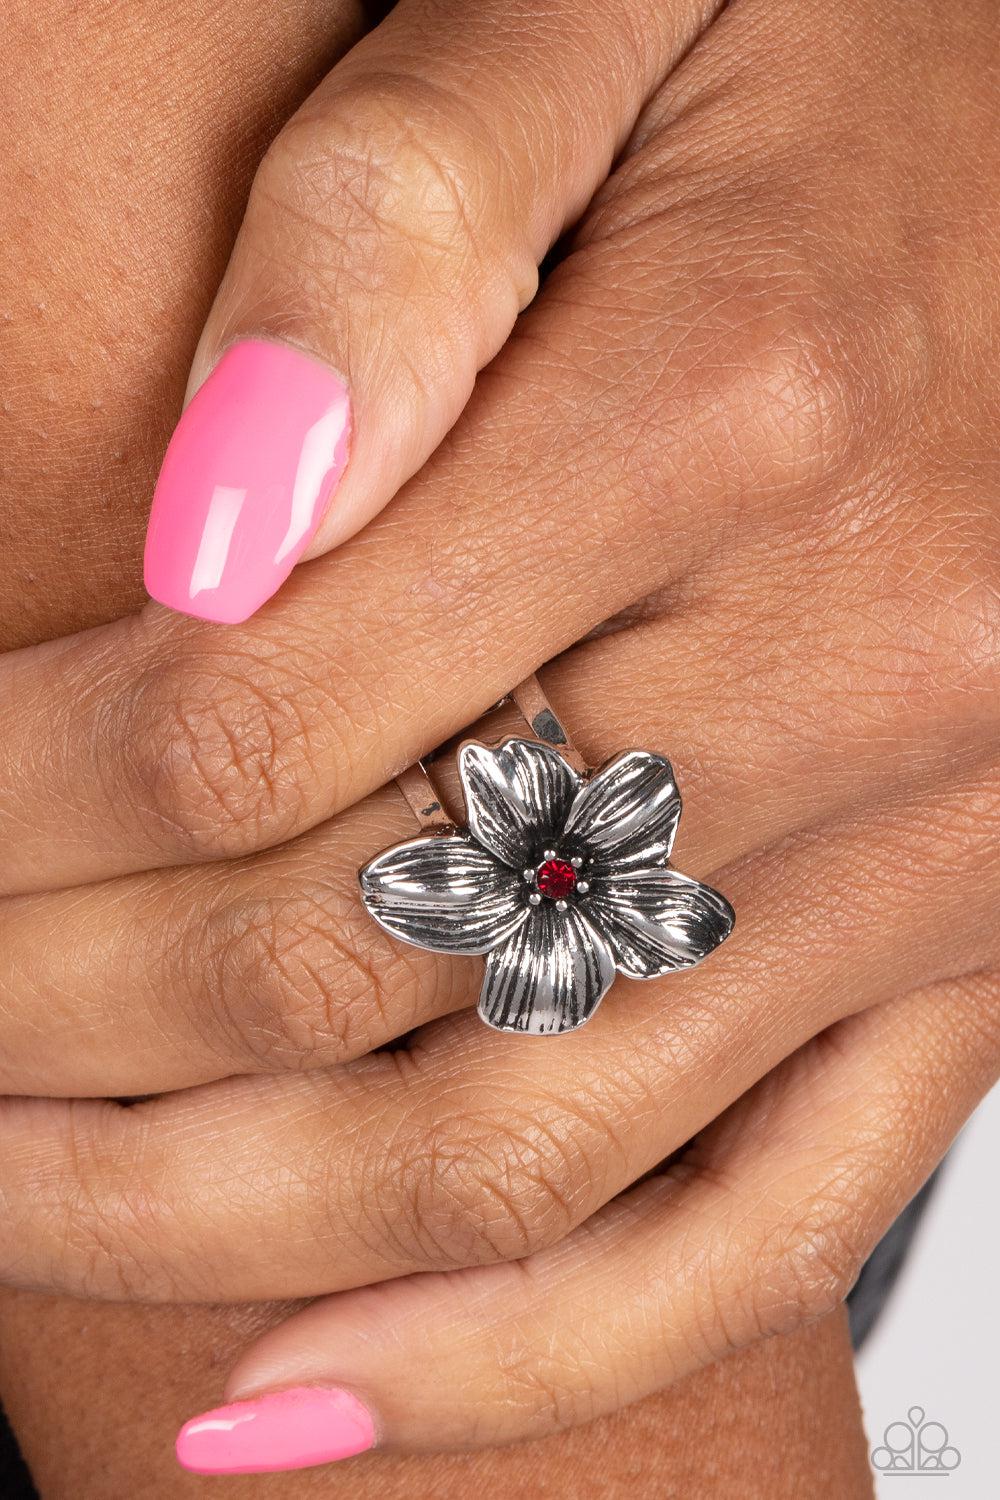 Tropical Treat Red Flower Ring - Paparazzi Accessories- lightbox - CarasShop.com - $5 Jewelry by Cara Jewels